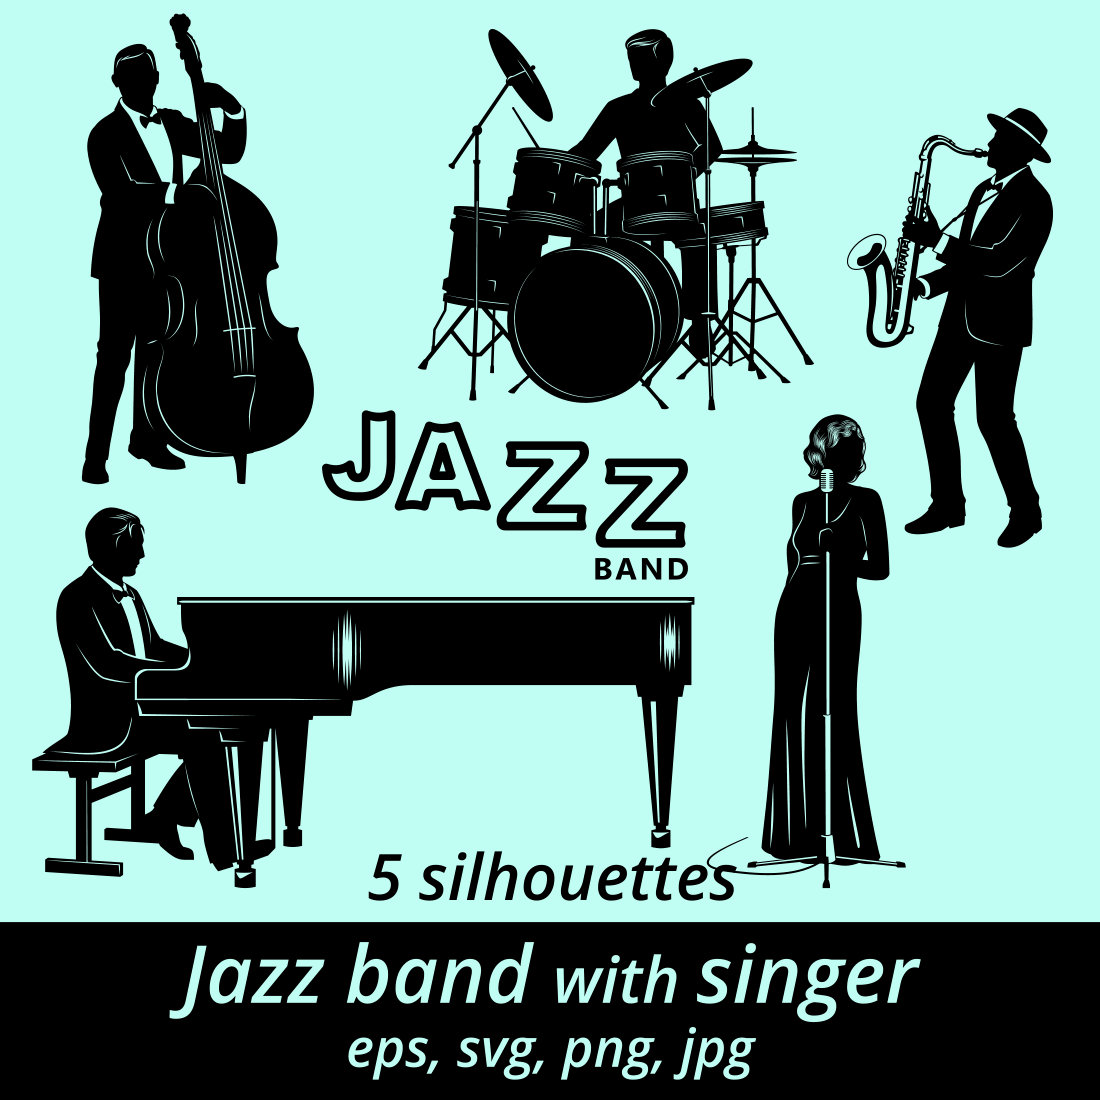 Jazz Band with Singer Silhouettes cover image.